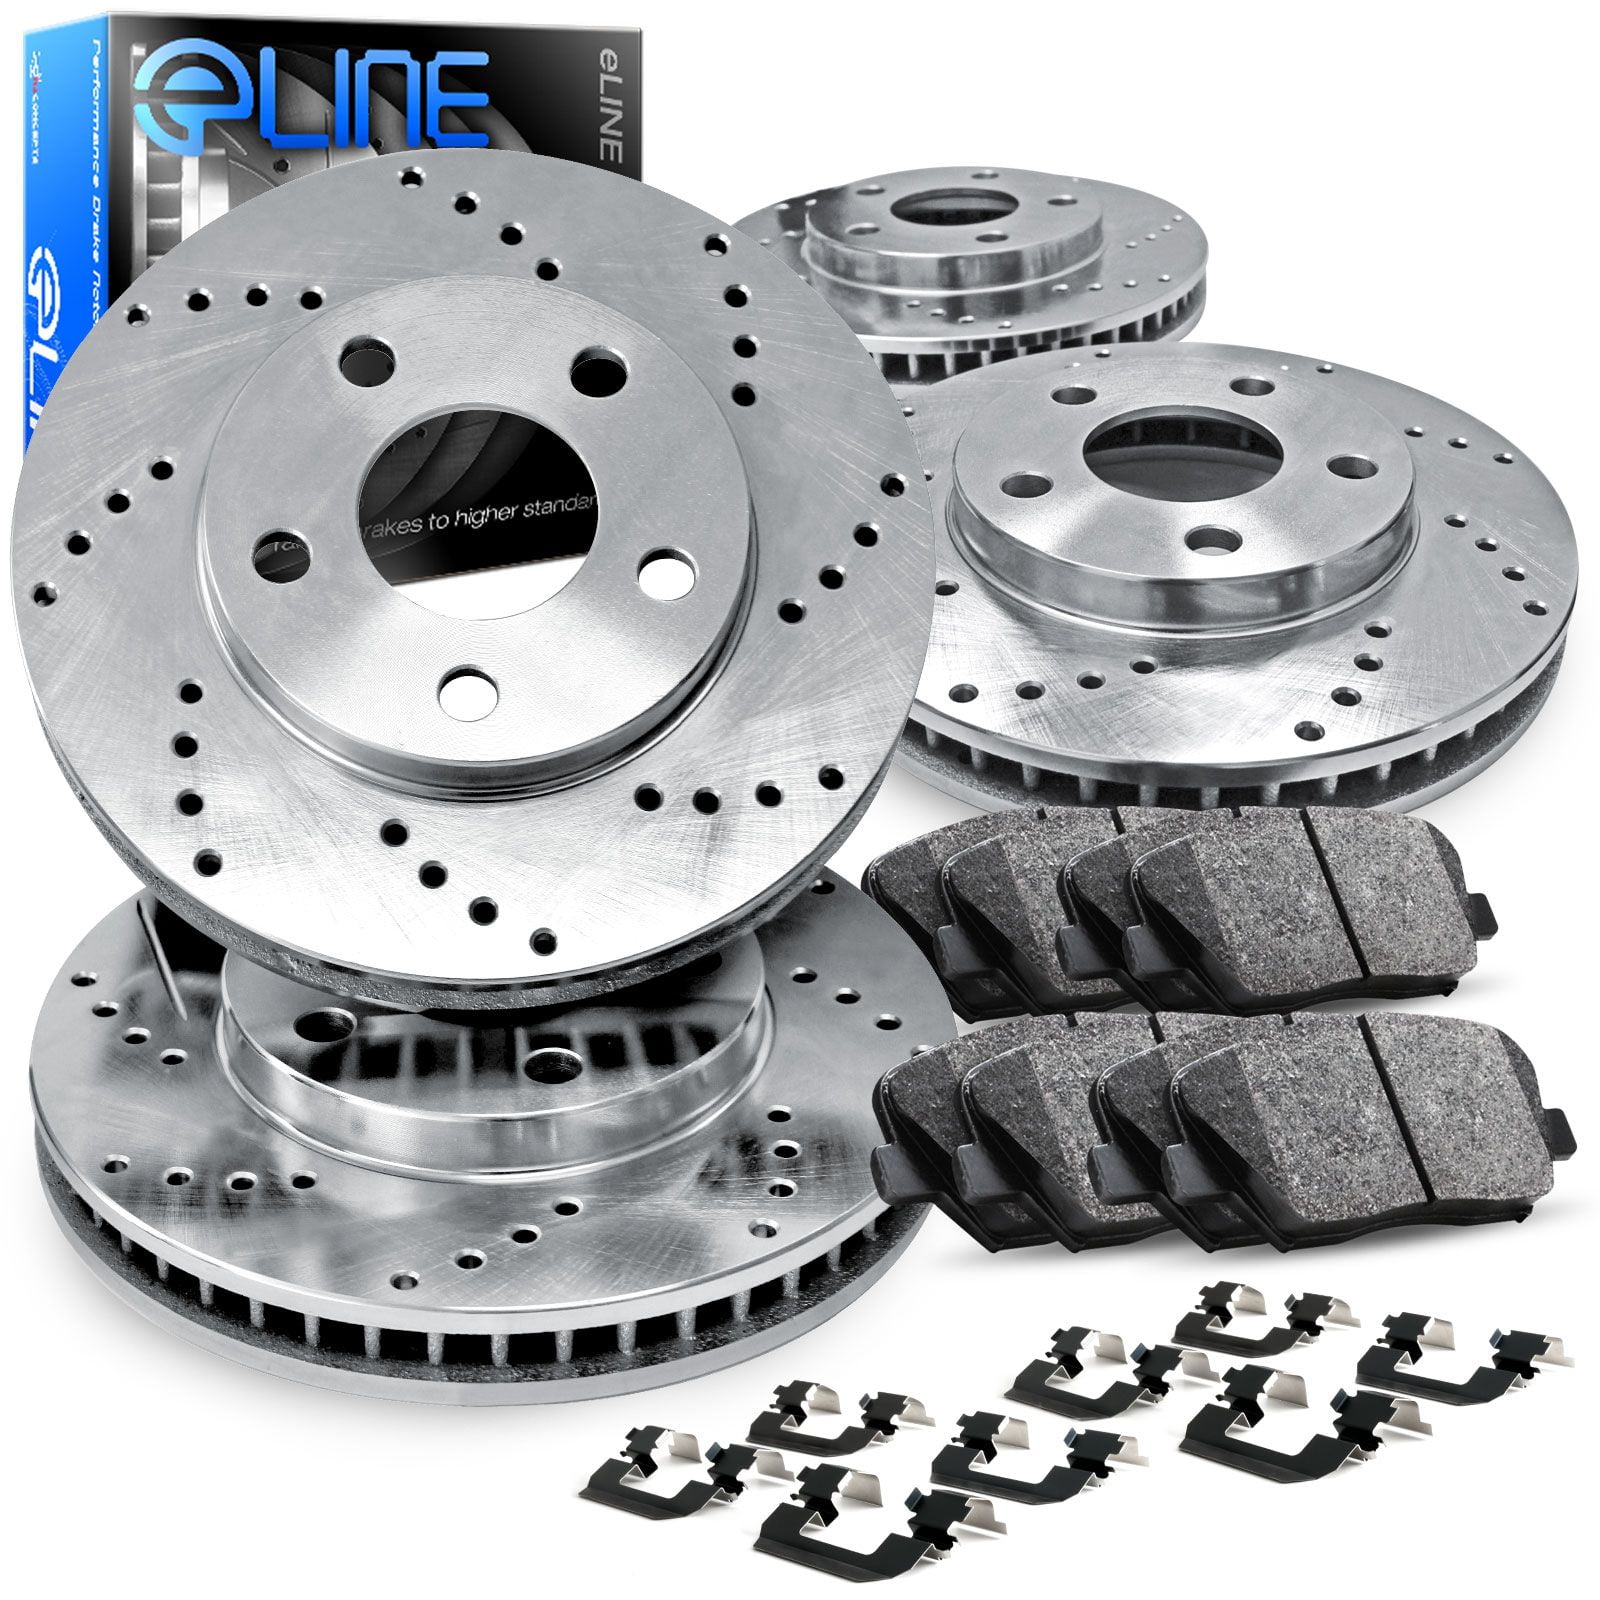 Front+Rear Drilled Slotted Brake Rotors & Ceramic Pads For Scion FR-S Subaru BRZ